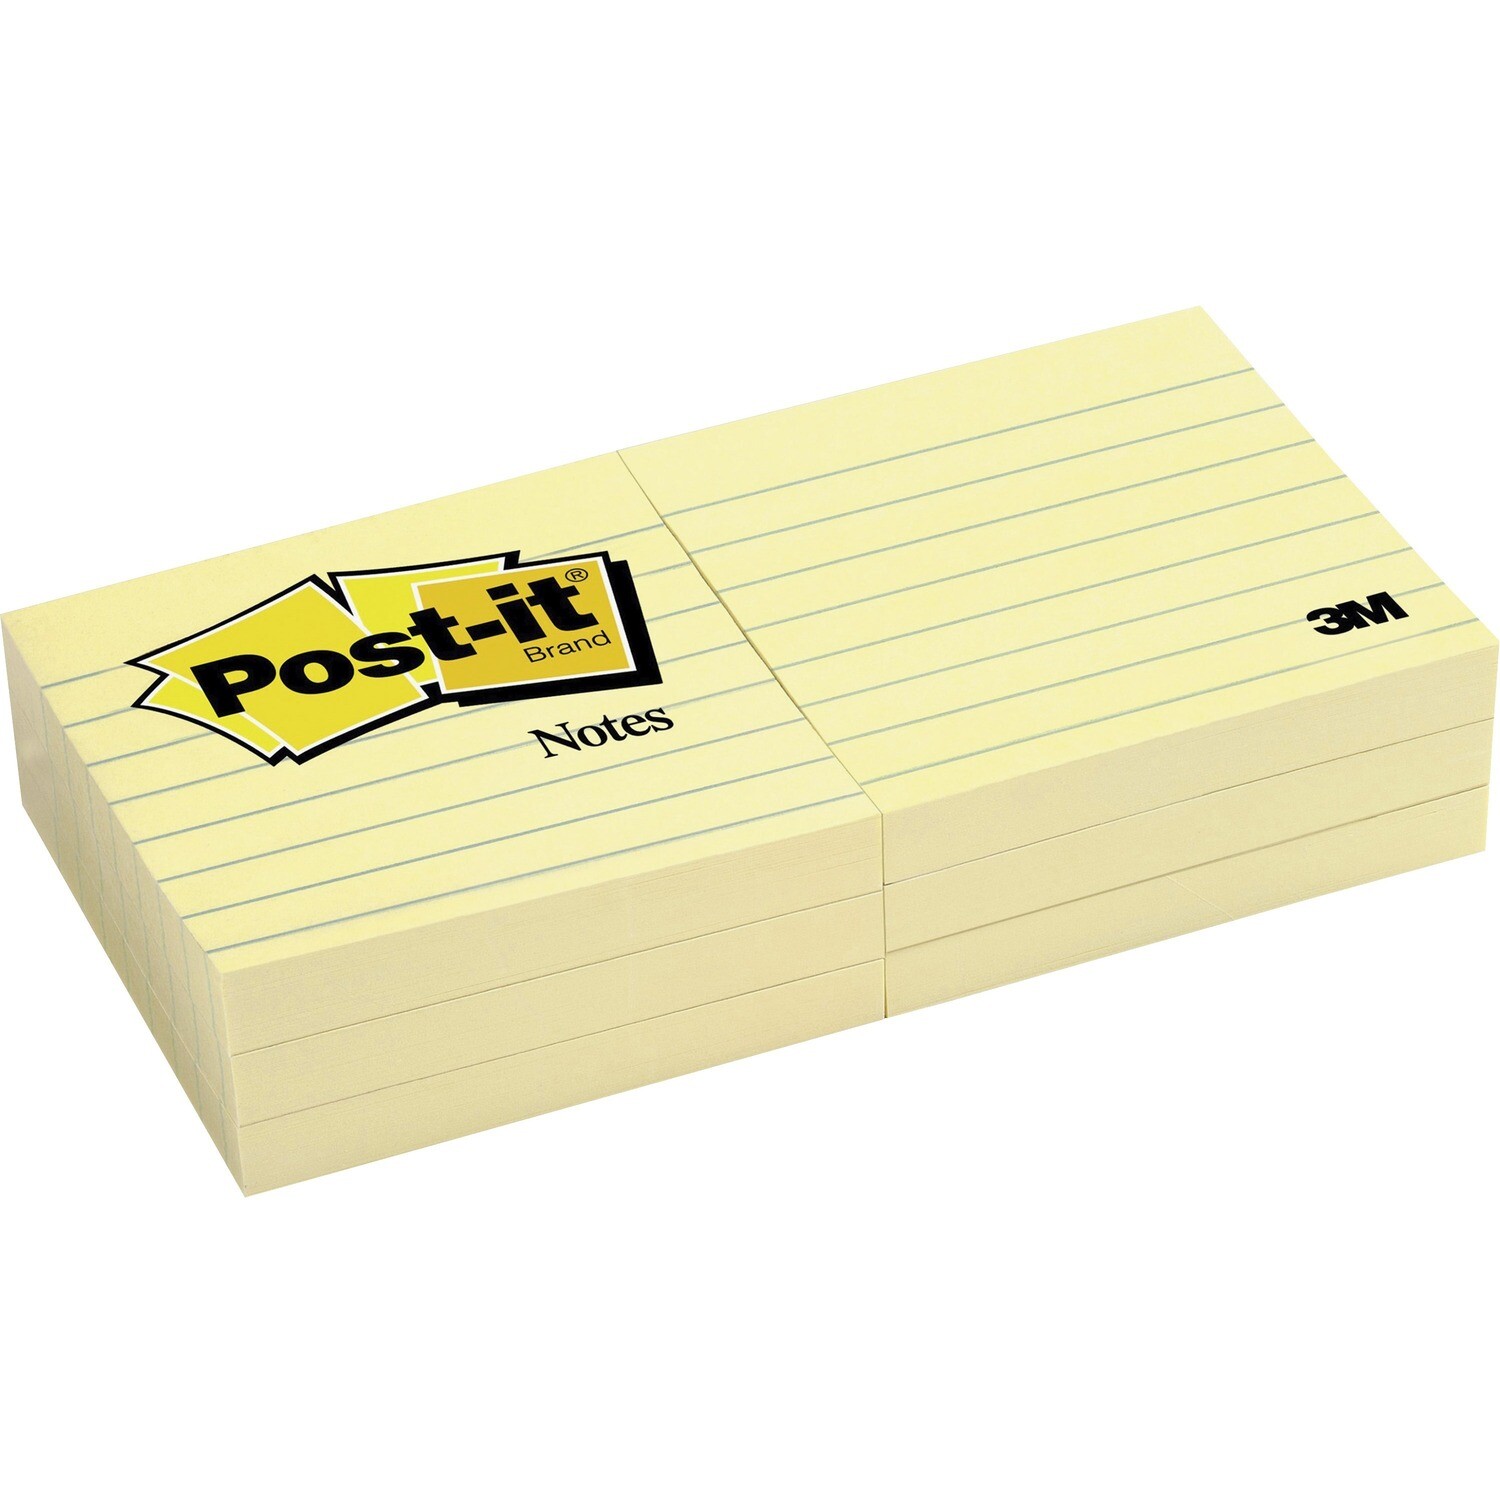 Adhesive Note, Ruled, Post-It 3" x 3", 6 Pack, Yellow